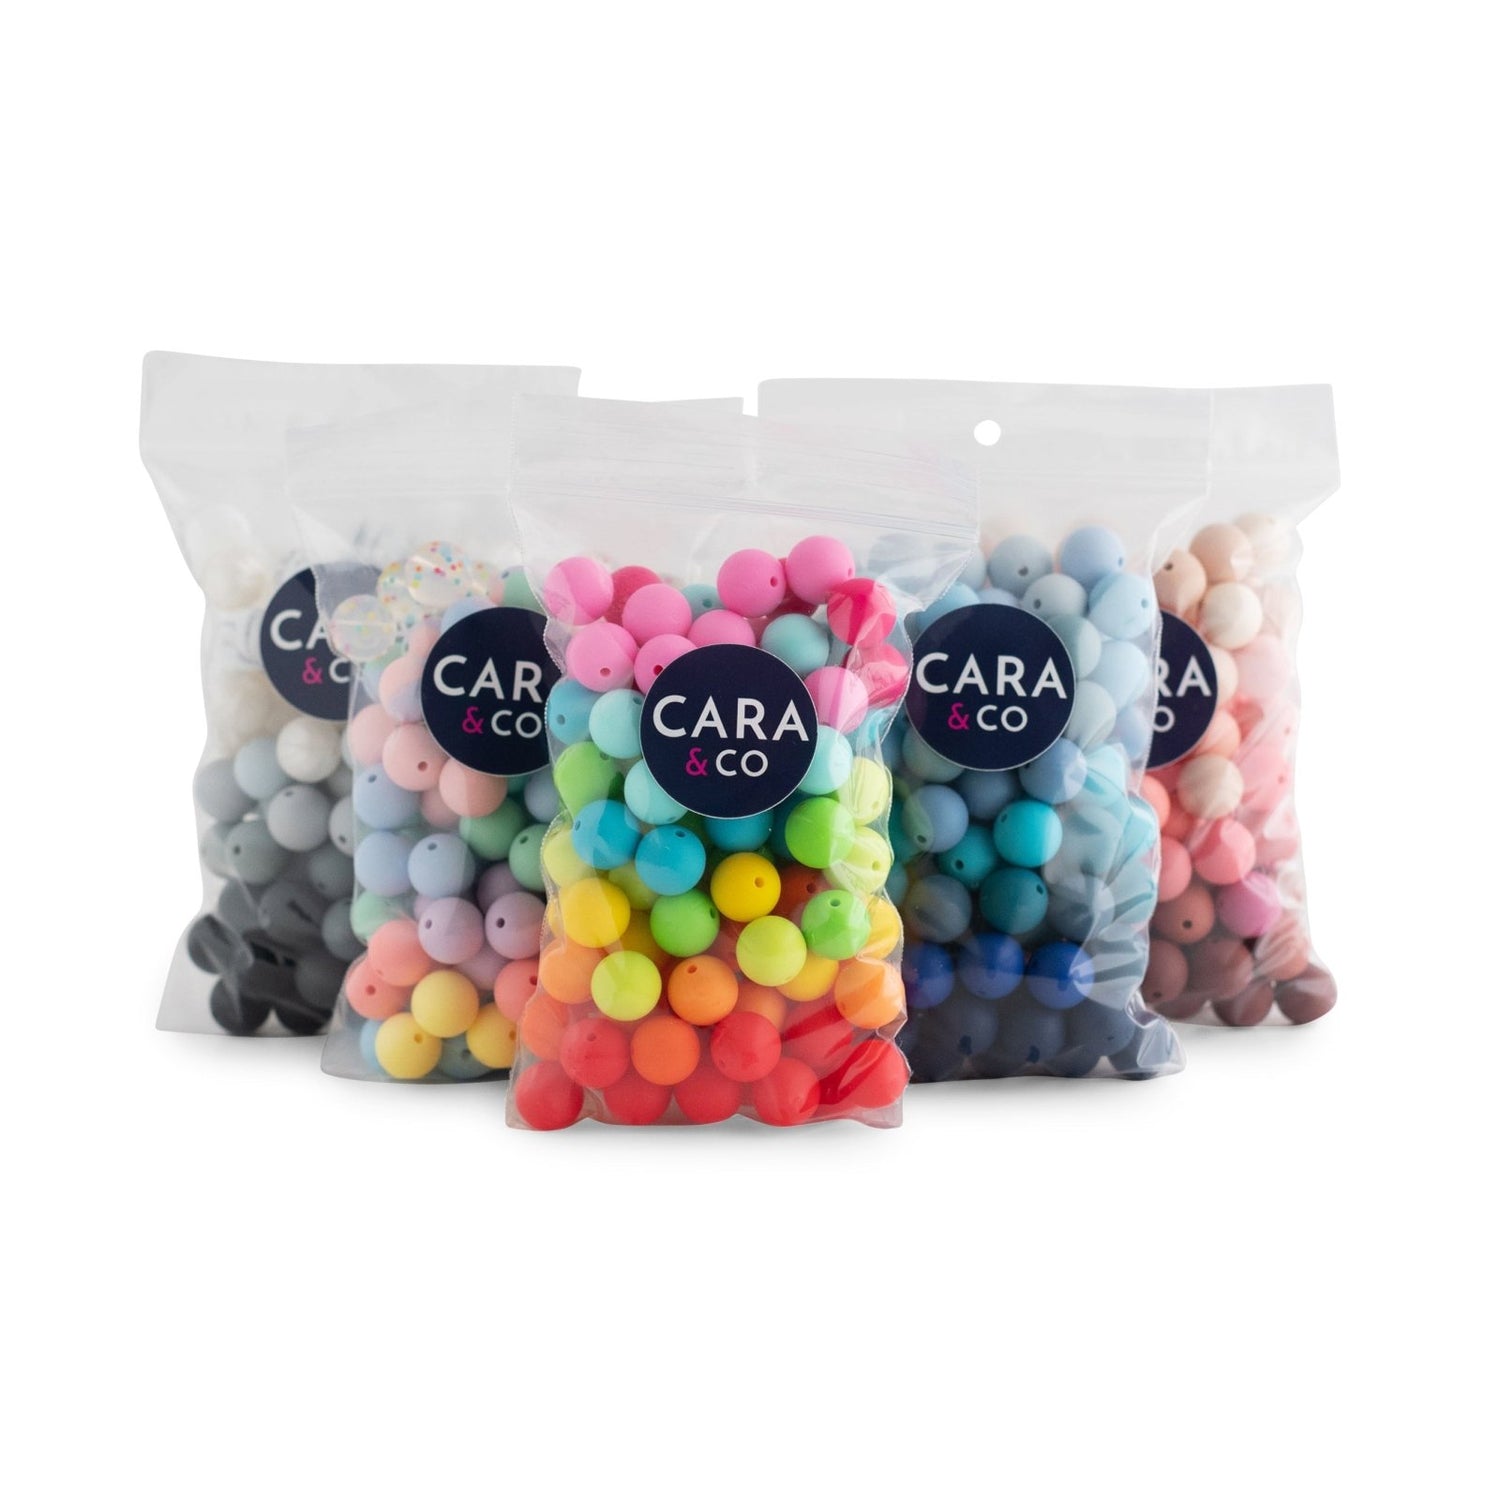 15mm Silicone Round Bead Packs - Cara & Co.